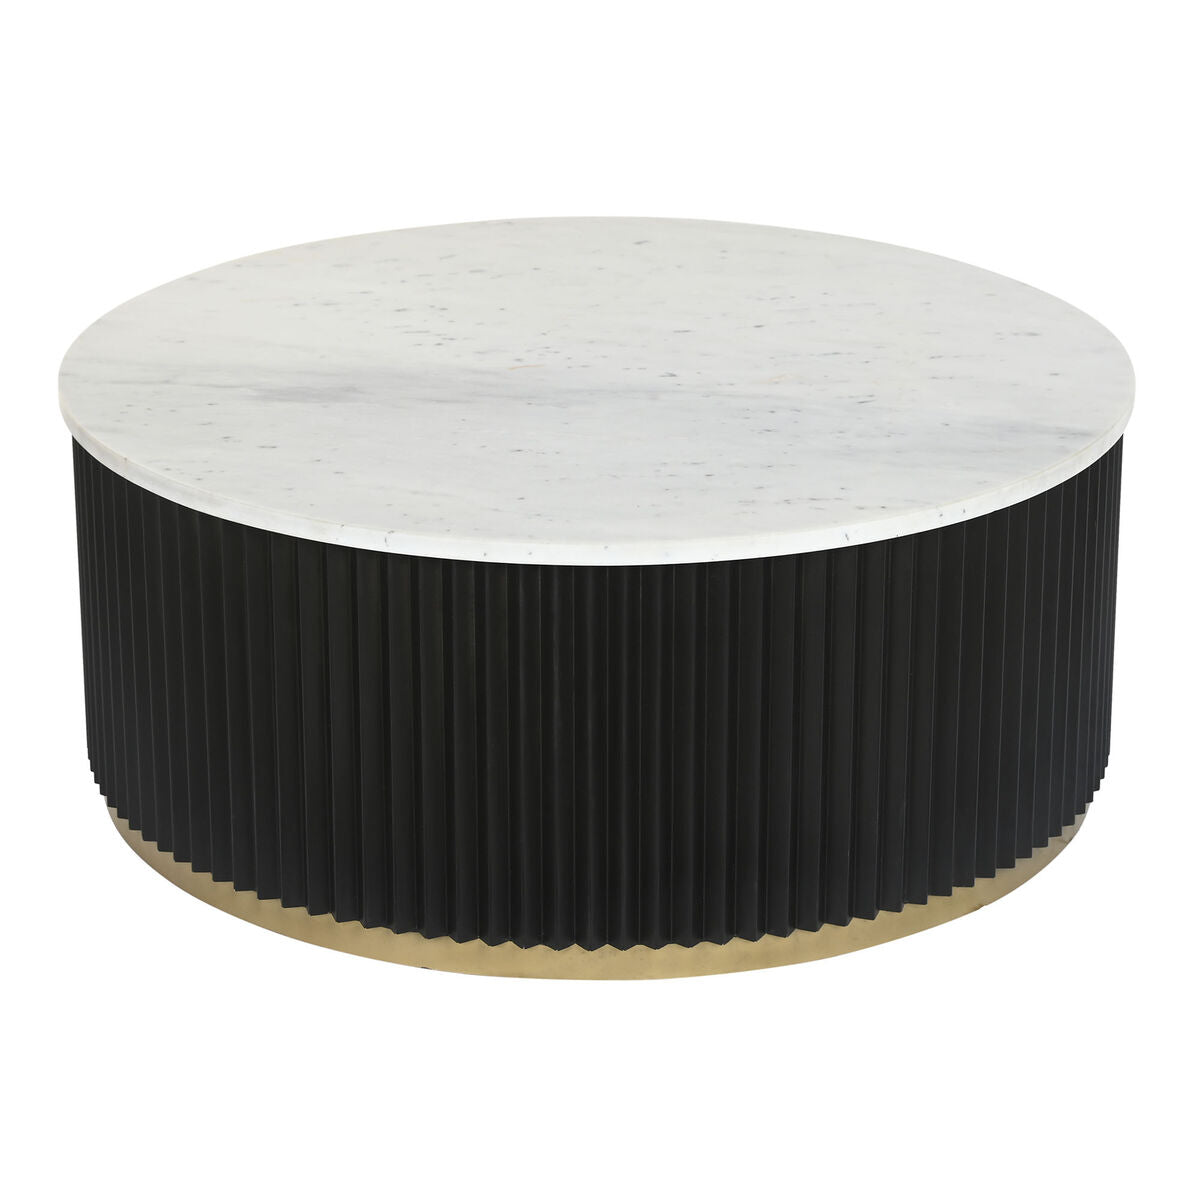 Centre Table in Marble and Black Metal (80 x 80 x 40 cm)